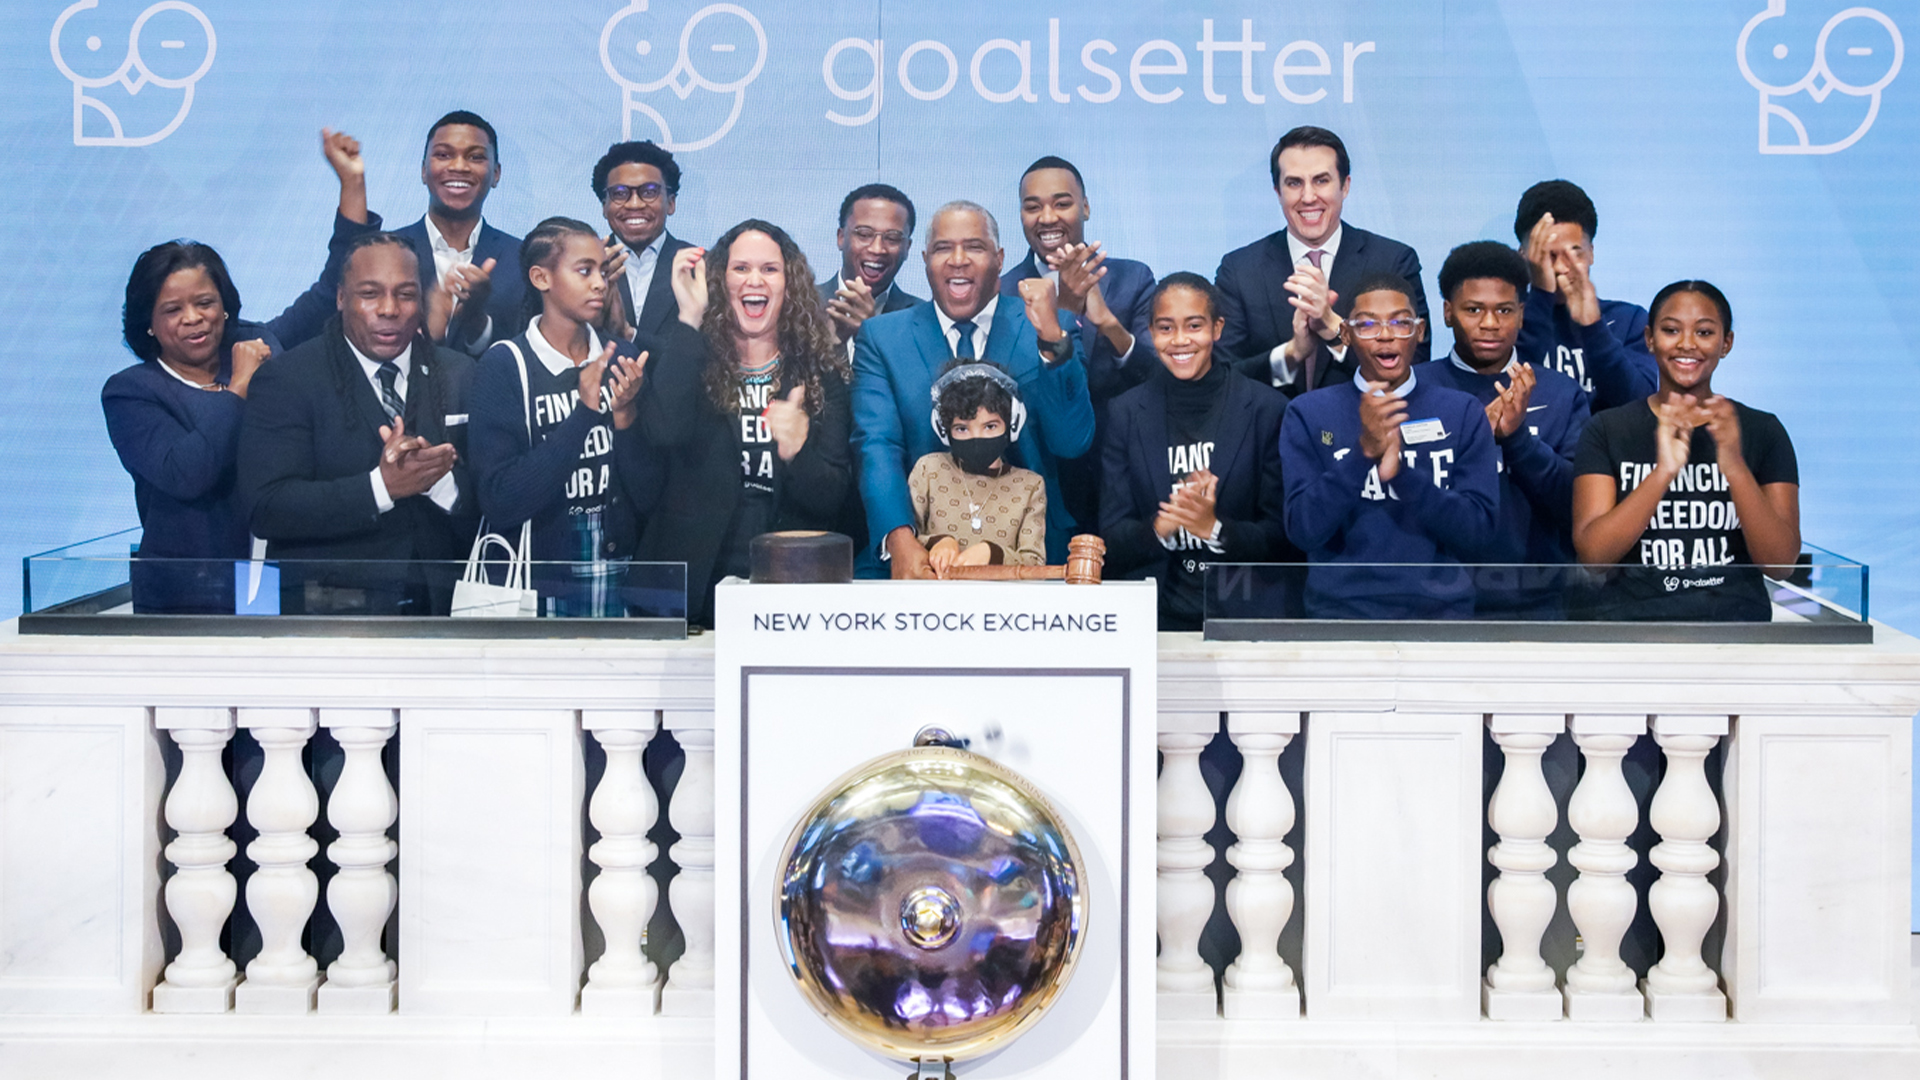 Goalsetter, Billionaire Robert F. Smith Ring NYSE Opening Bell After Gifting Thousands Of Shares To Young People Of Color